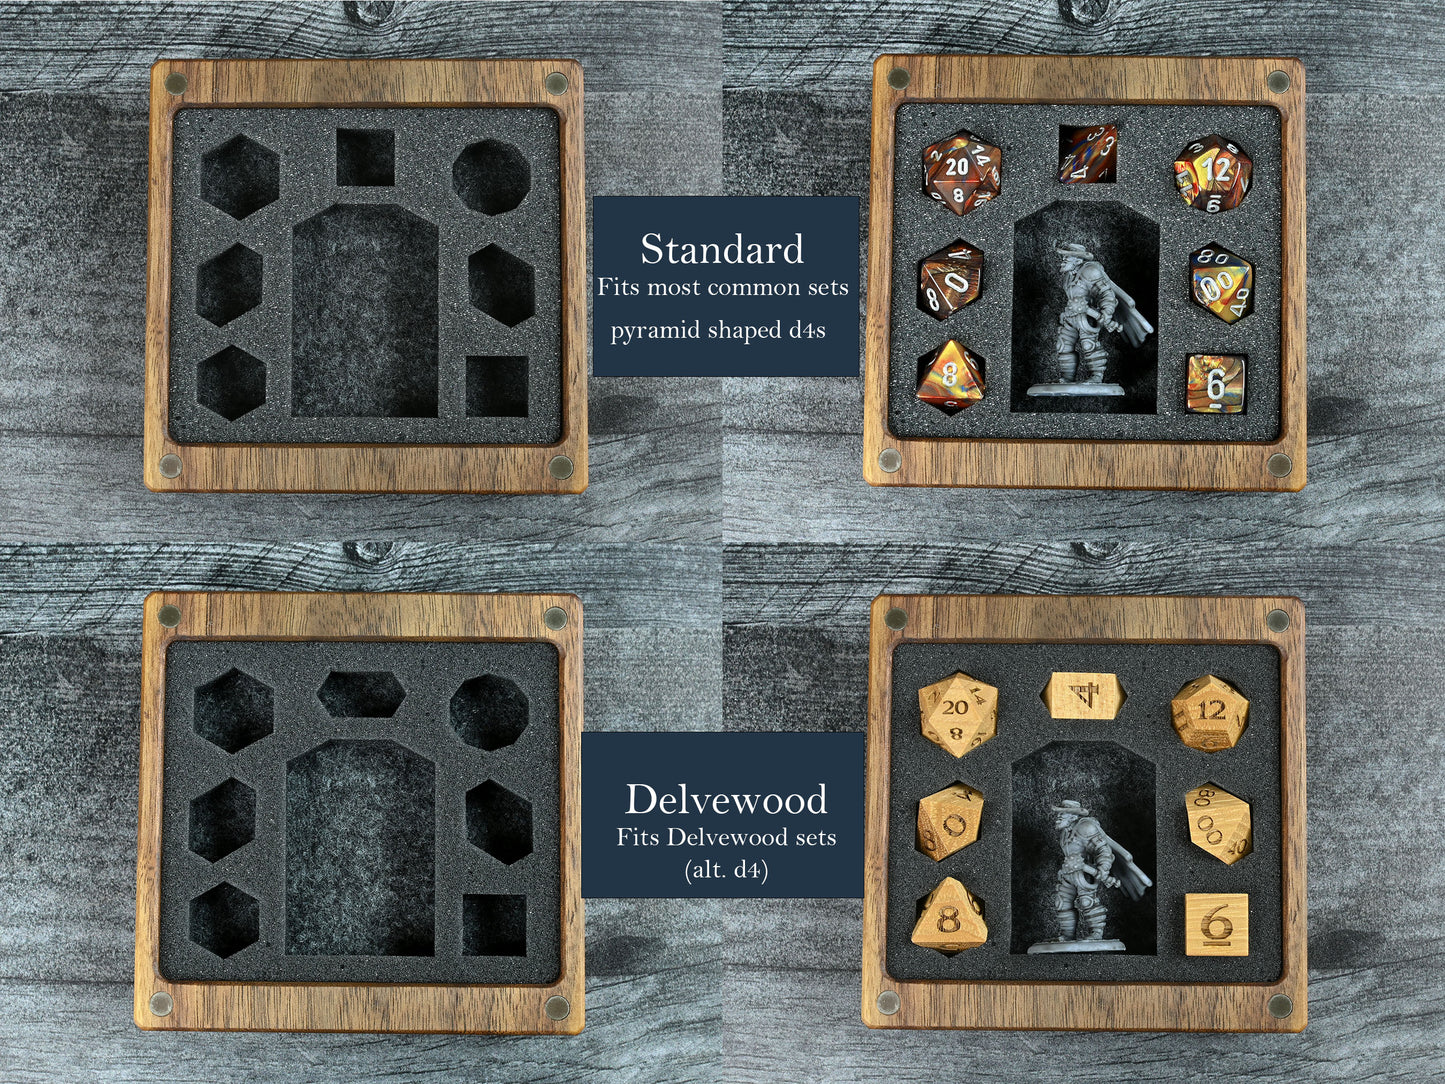 Examples of foam inserts for the little delve dice box. The standard option fits most common sets with a pyramid shaped d4. The Delvewood version fits Delvewood dice sets.